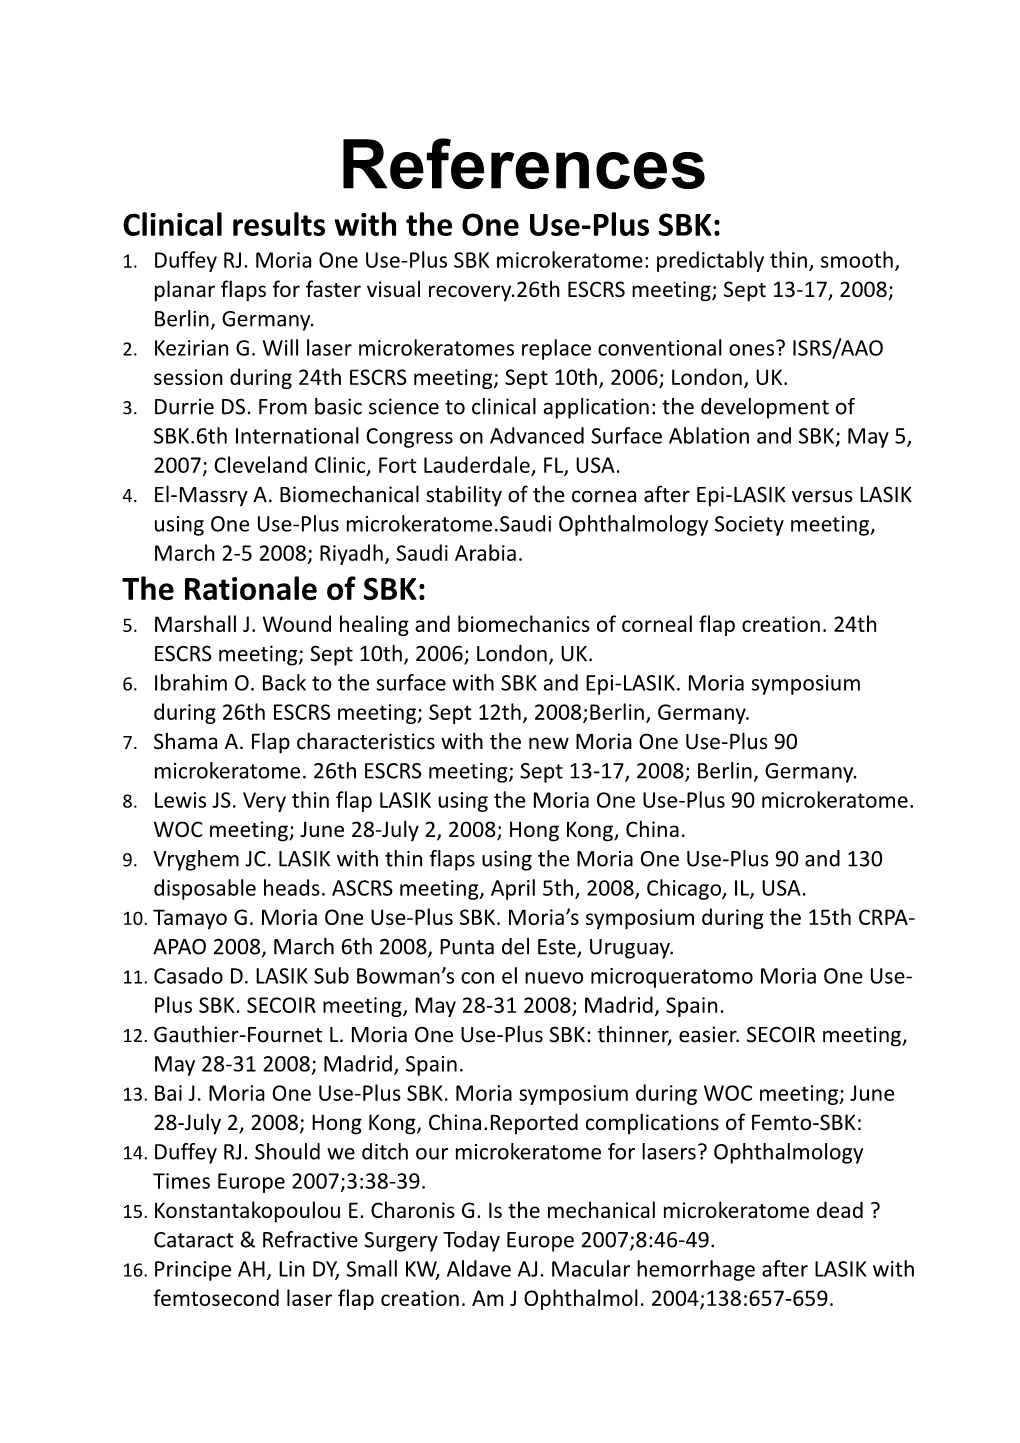 Clinical Results with the One Use-Plus SBK